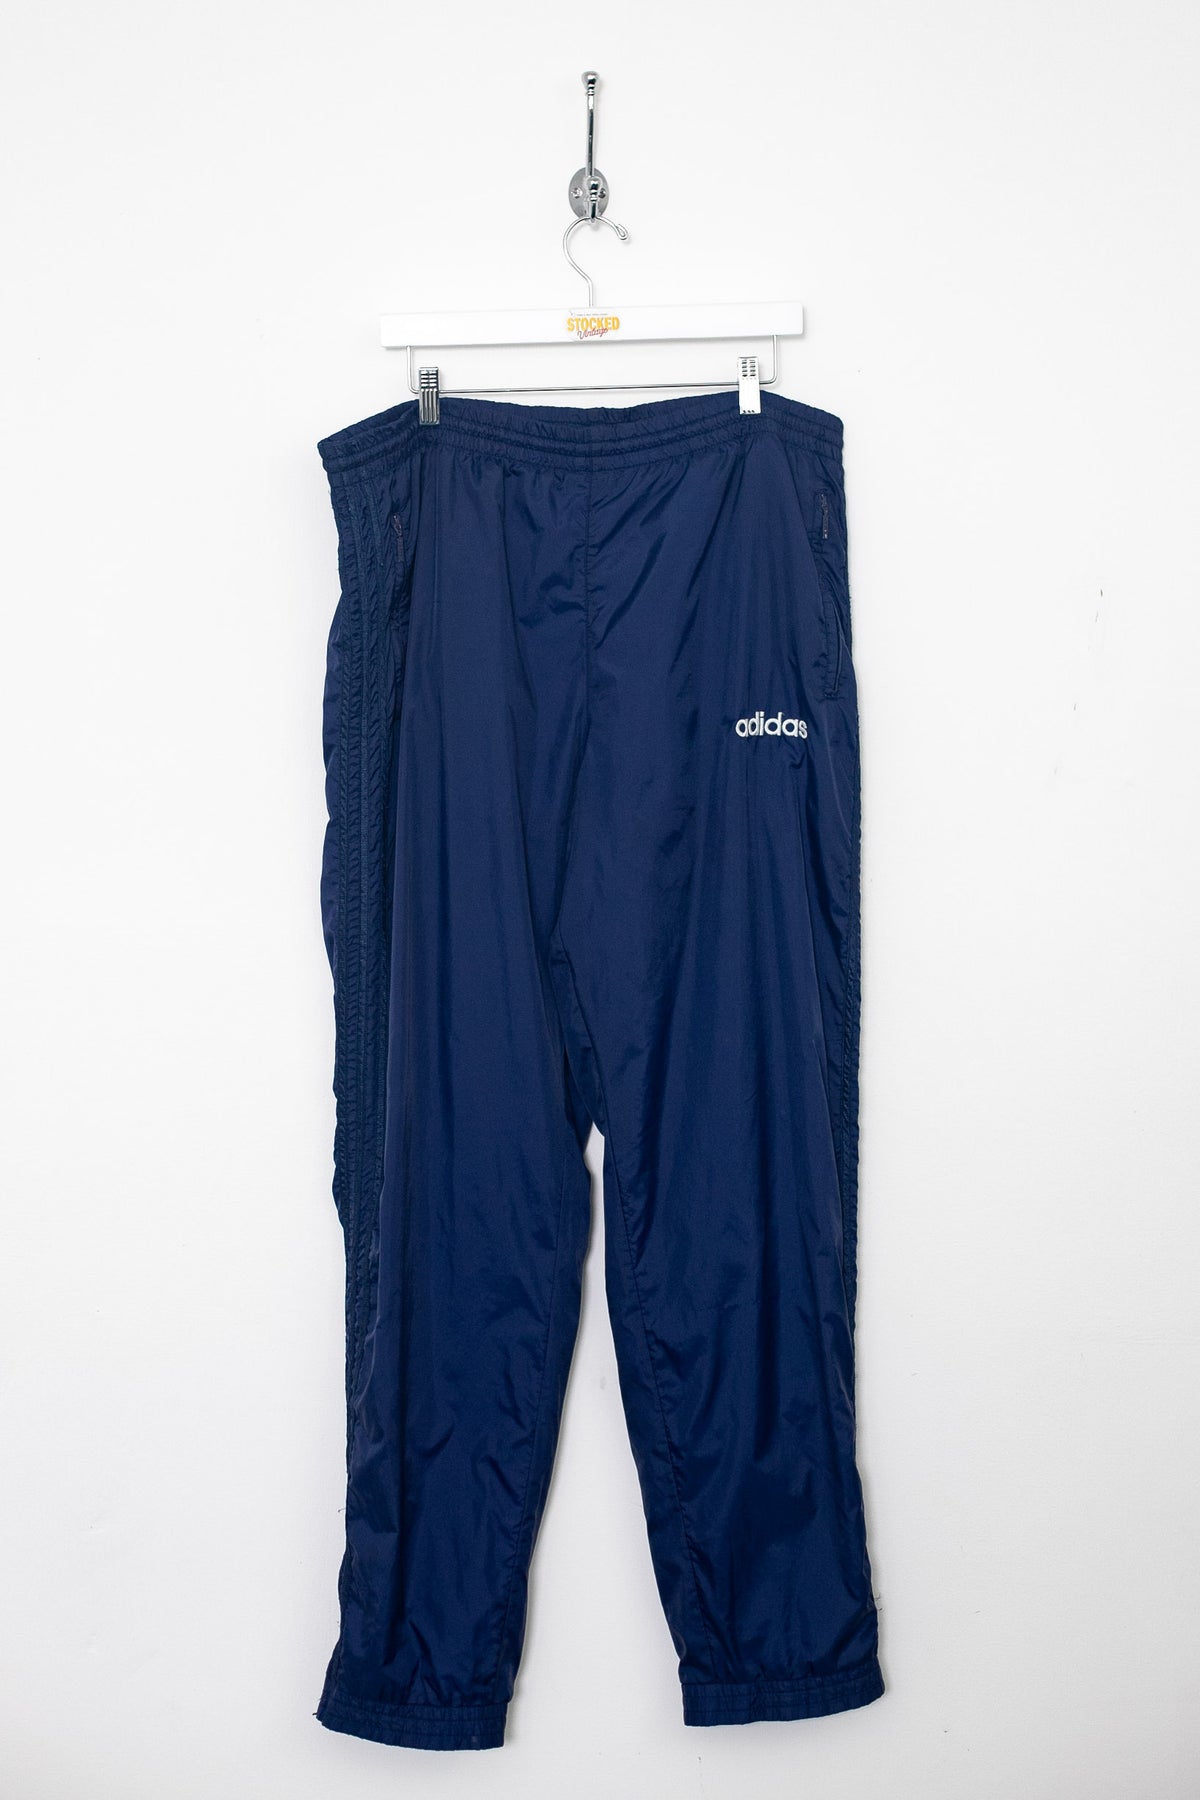 90s Adidas Tracksuit Bottoms (XL)